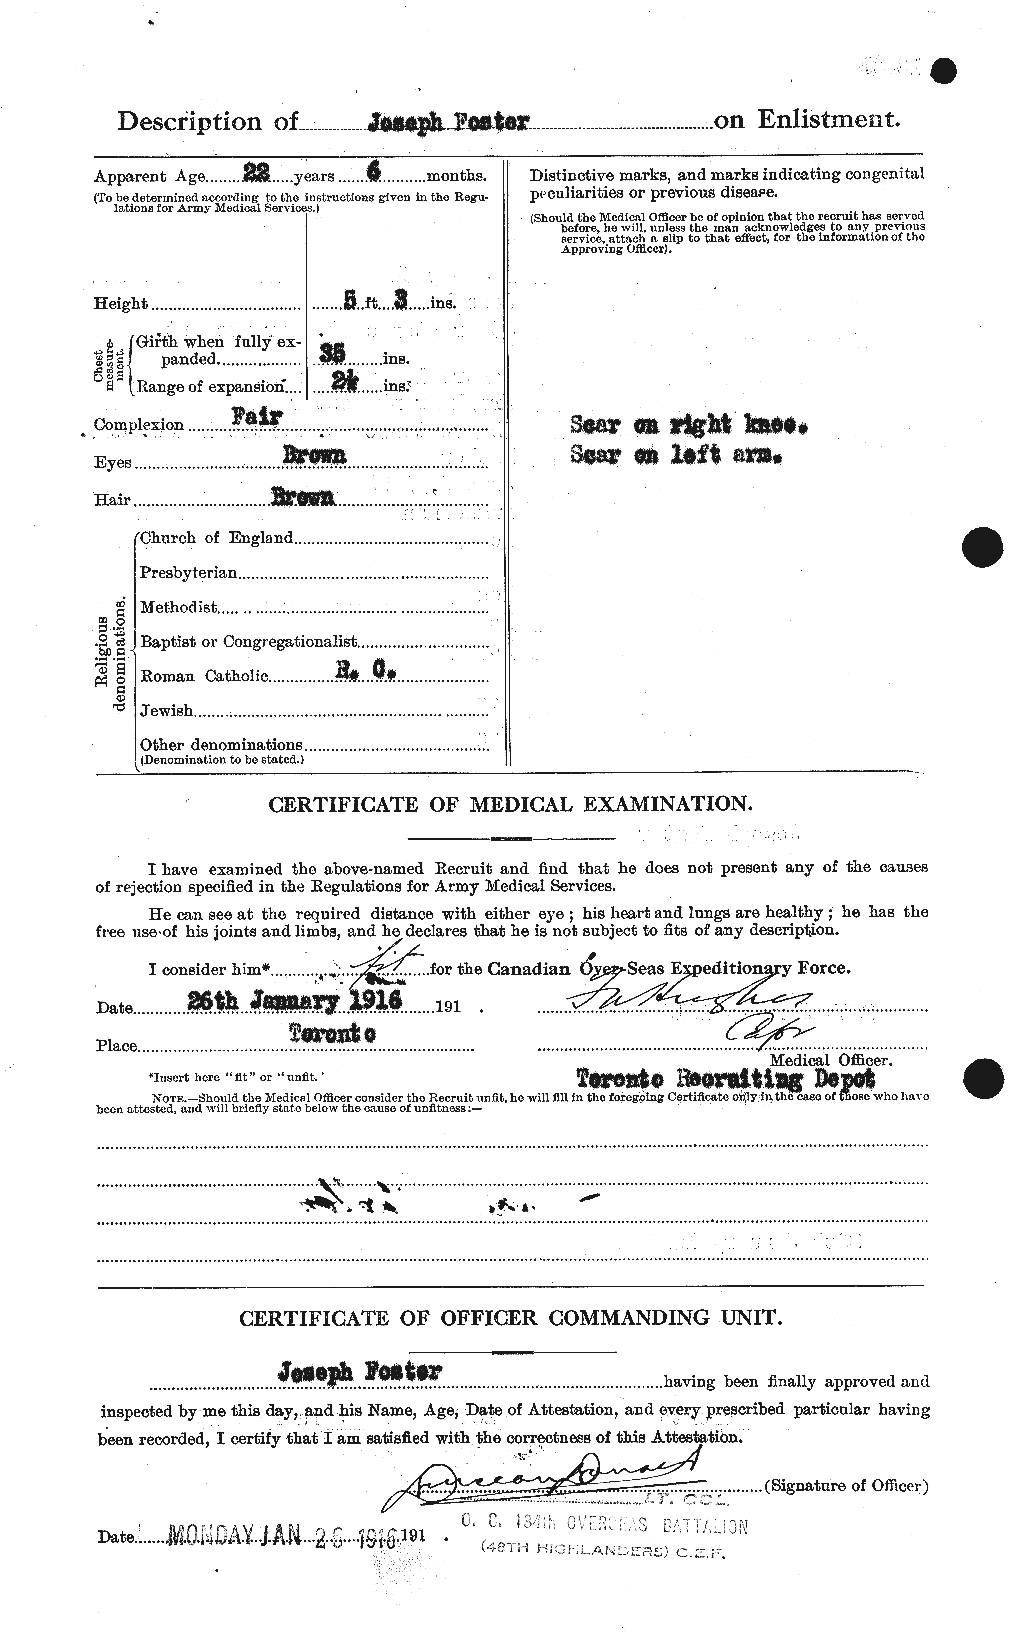 Personnel Records of the First World War - CEF 333377b